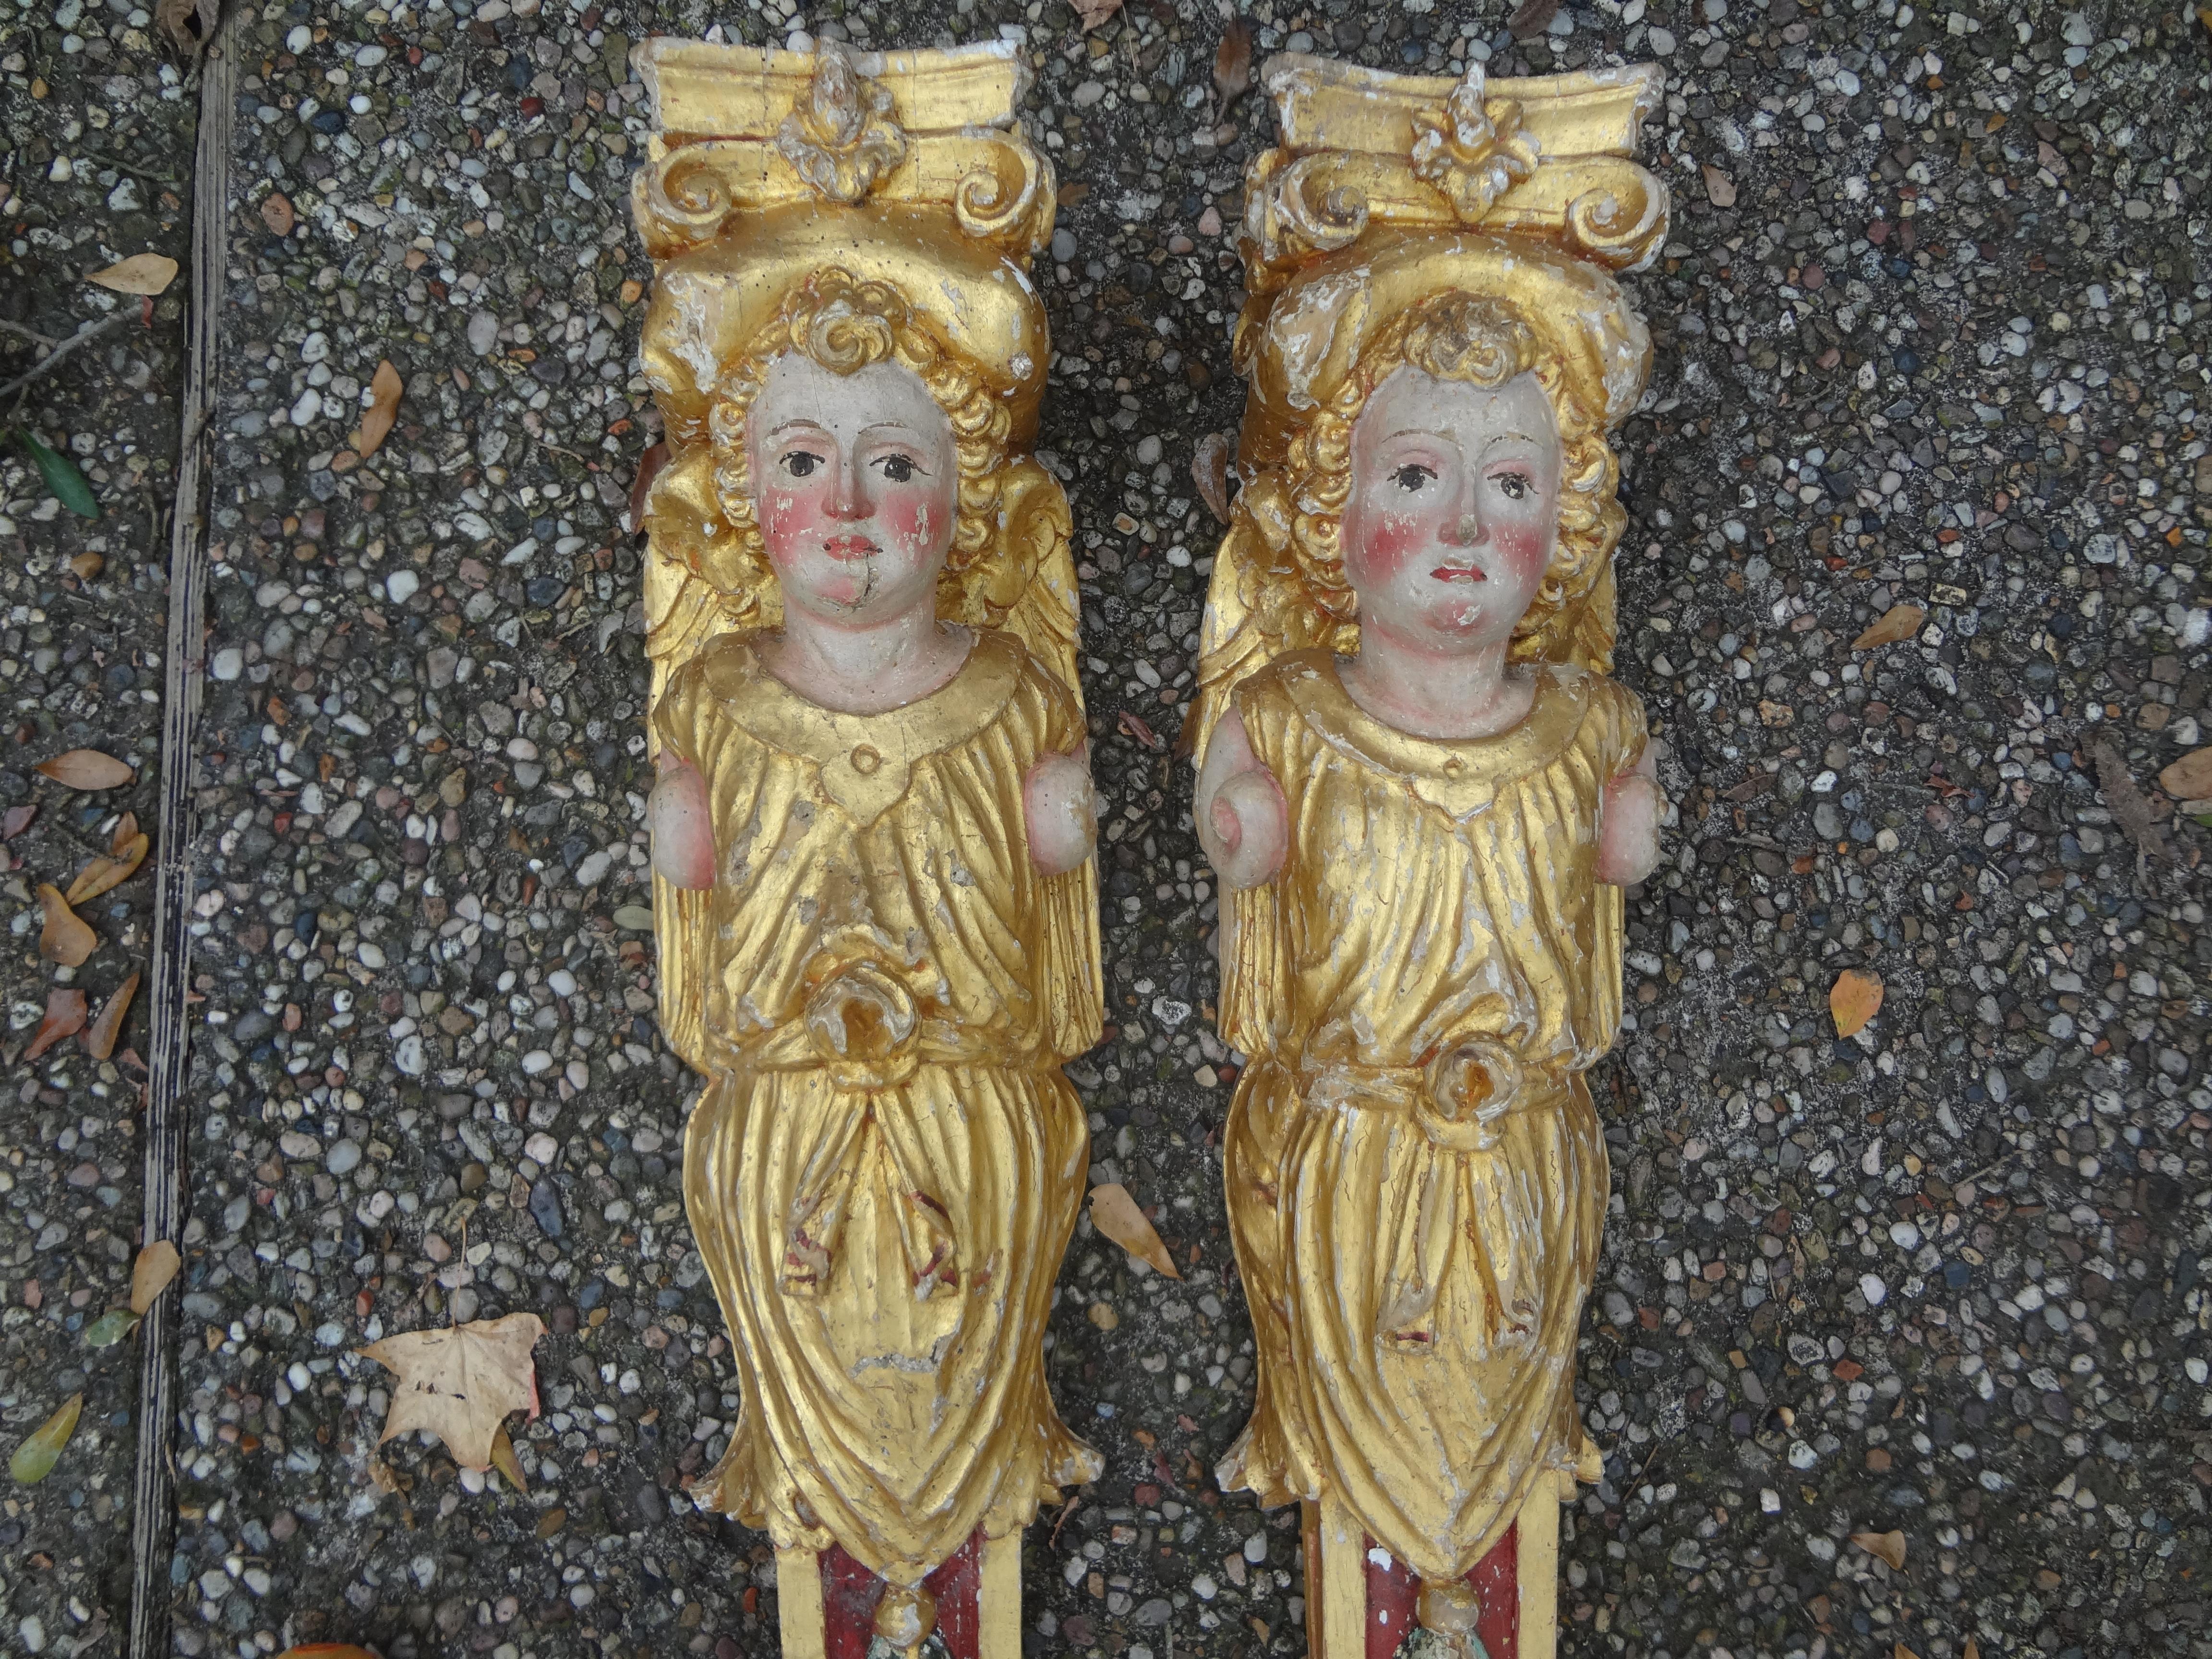 Stunning pair of 18th century Italian Baroque carved painted and giltwood caryatid architectural elements. These beautifully carved antique Italian pilaster columns, wall brackets, corbels or fragments are beautifully decorated. Great patina!.